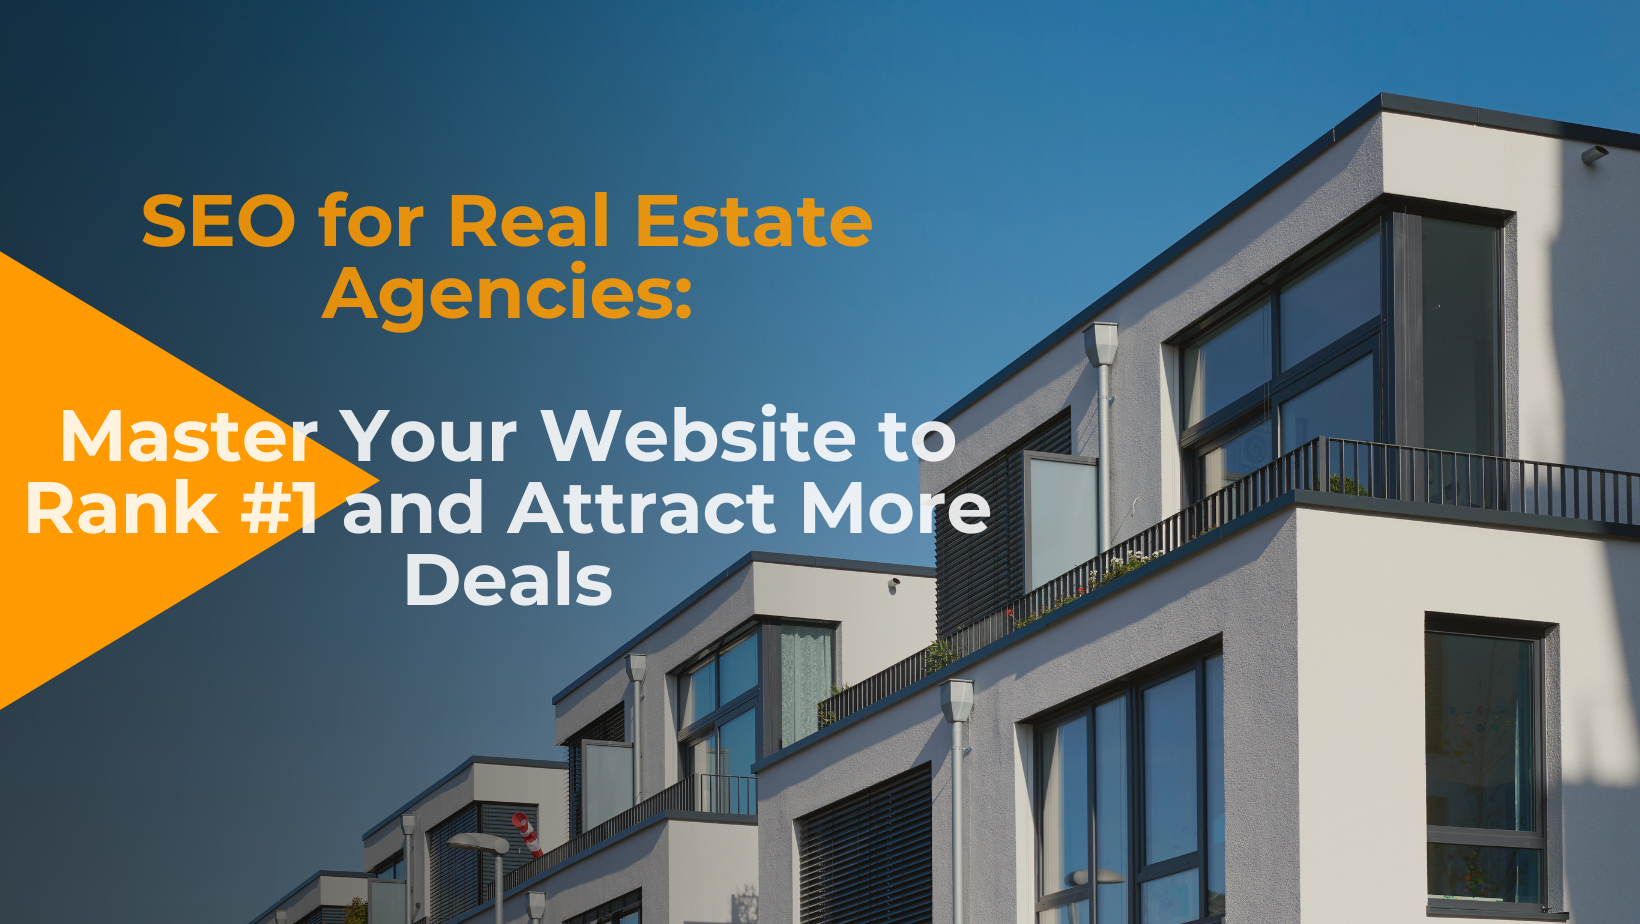 SEO for Real Estate Agencies